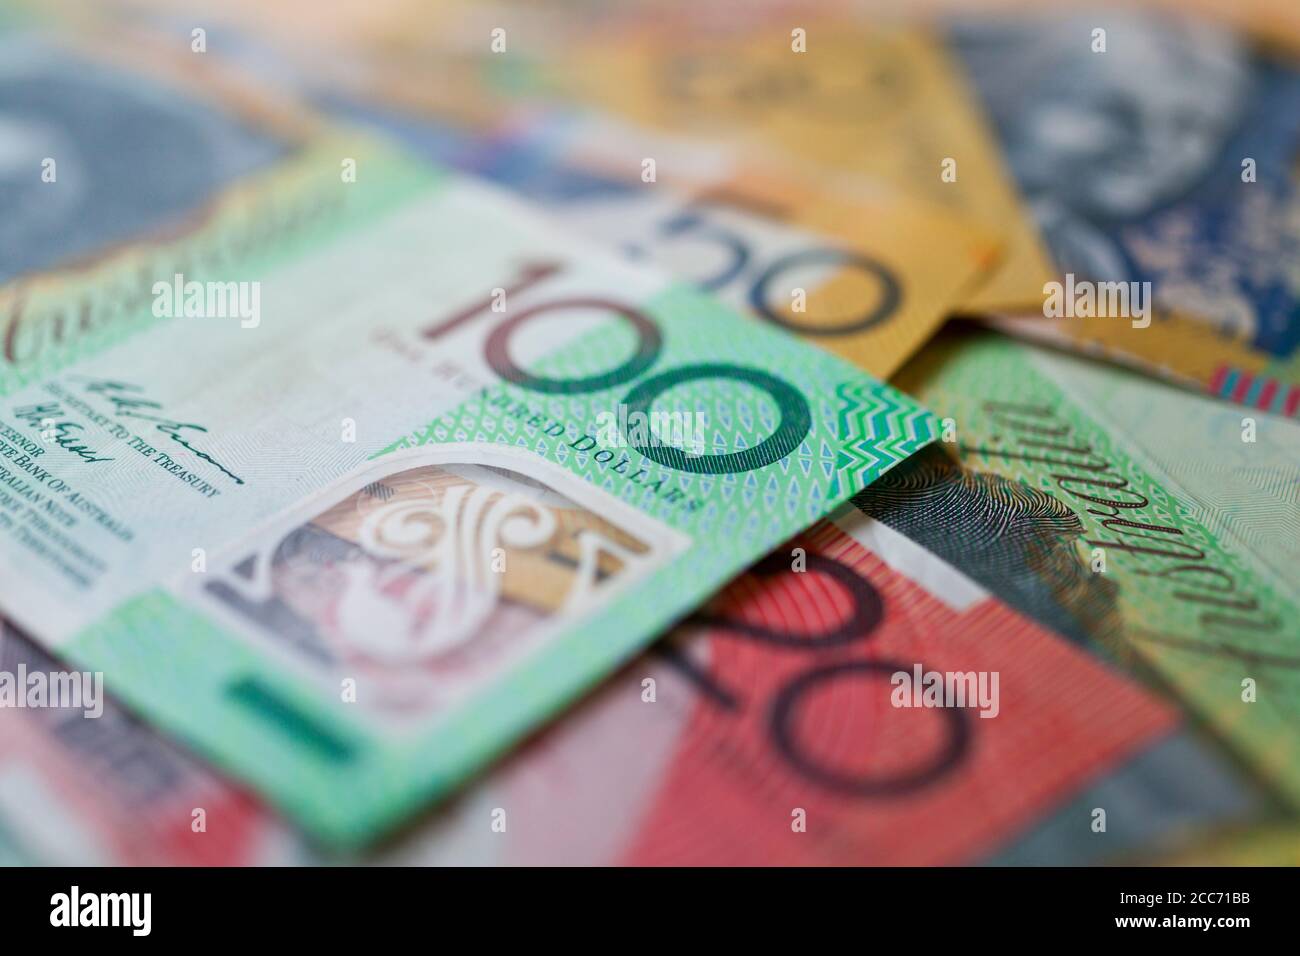 Australian money, currency or cash flat on table Stock Photo